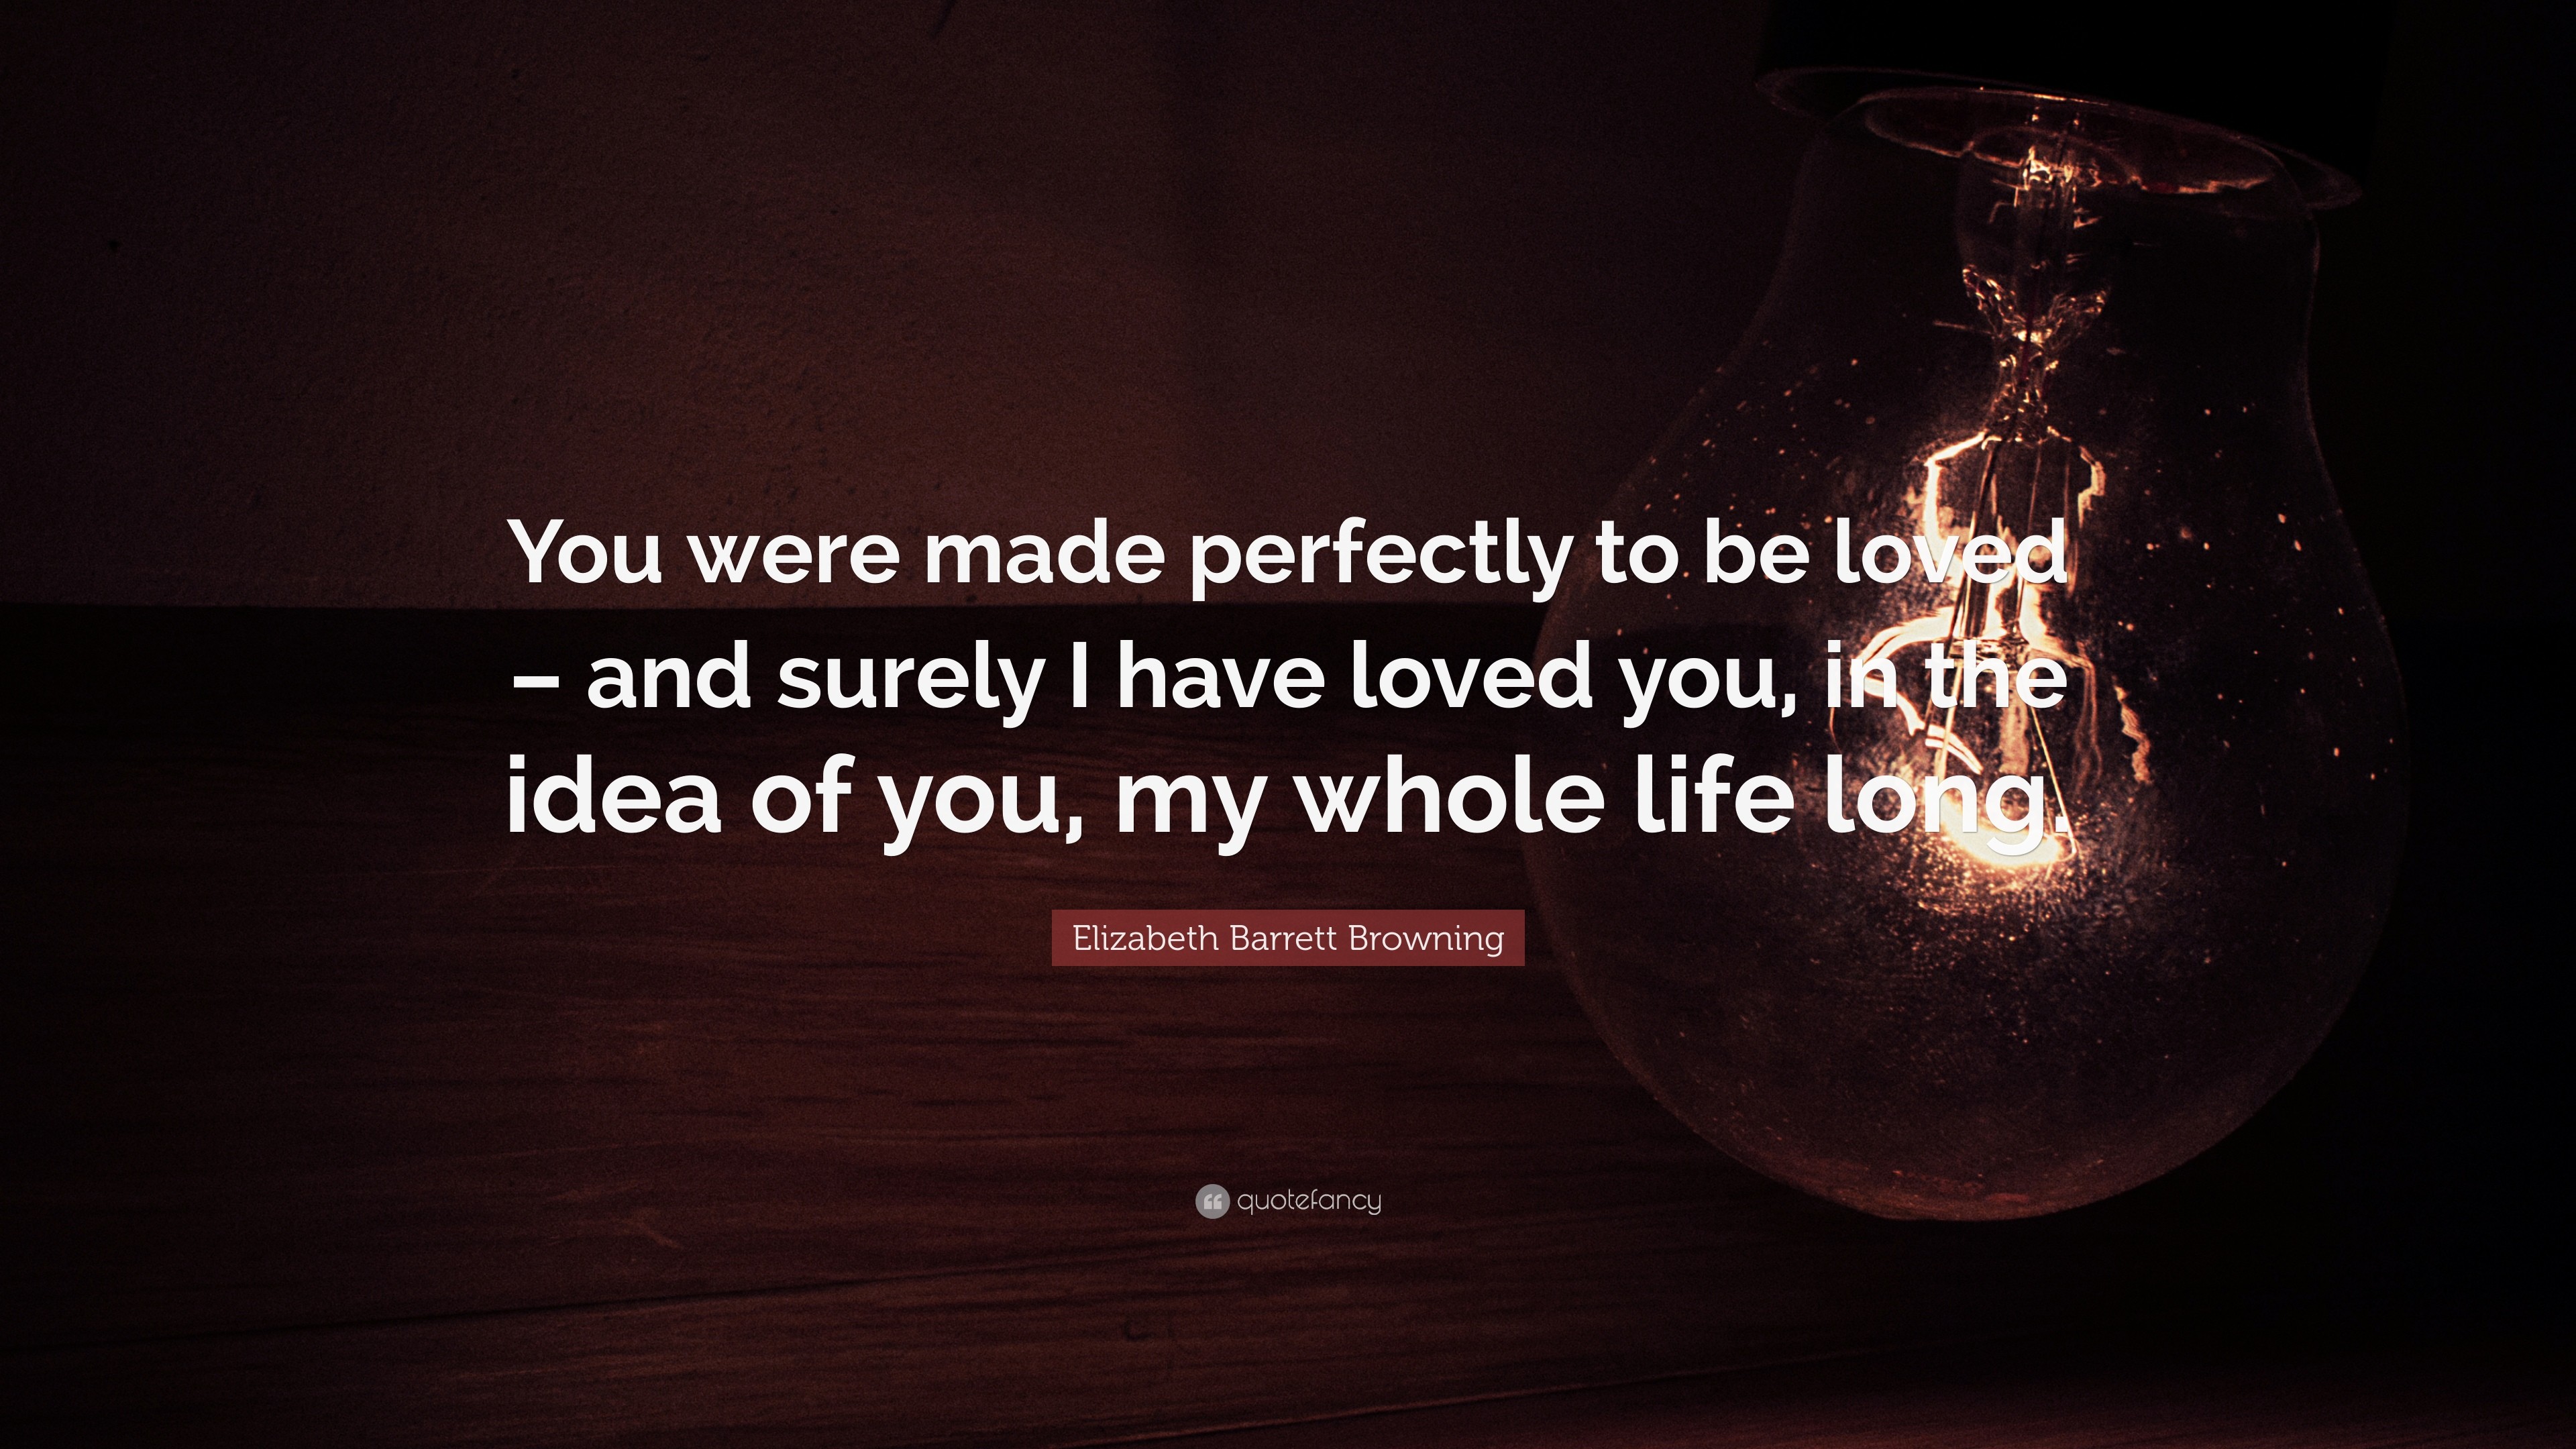 3840x2160 Elizabeth Barrett Browning Quote: “You were made perfectly to be loved –  and surely